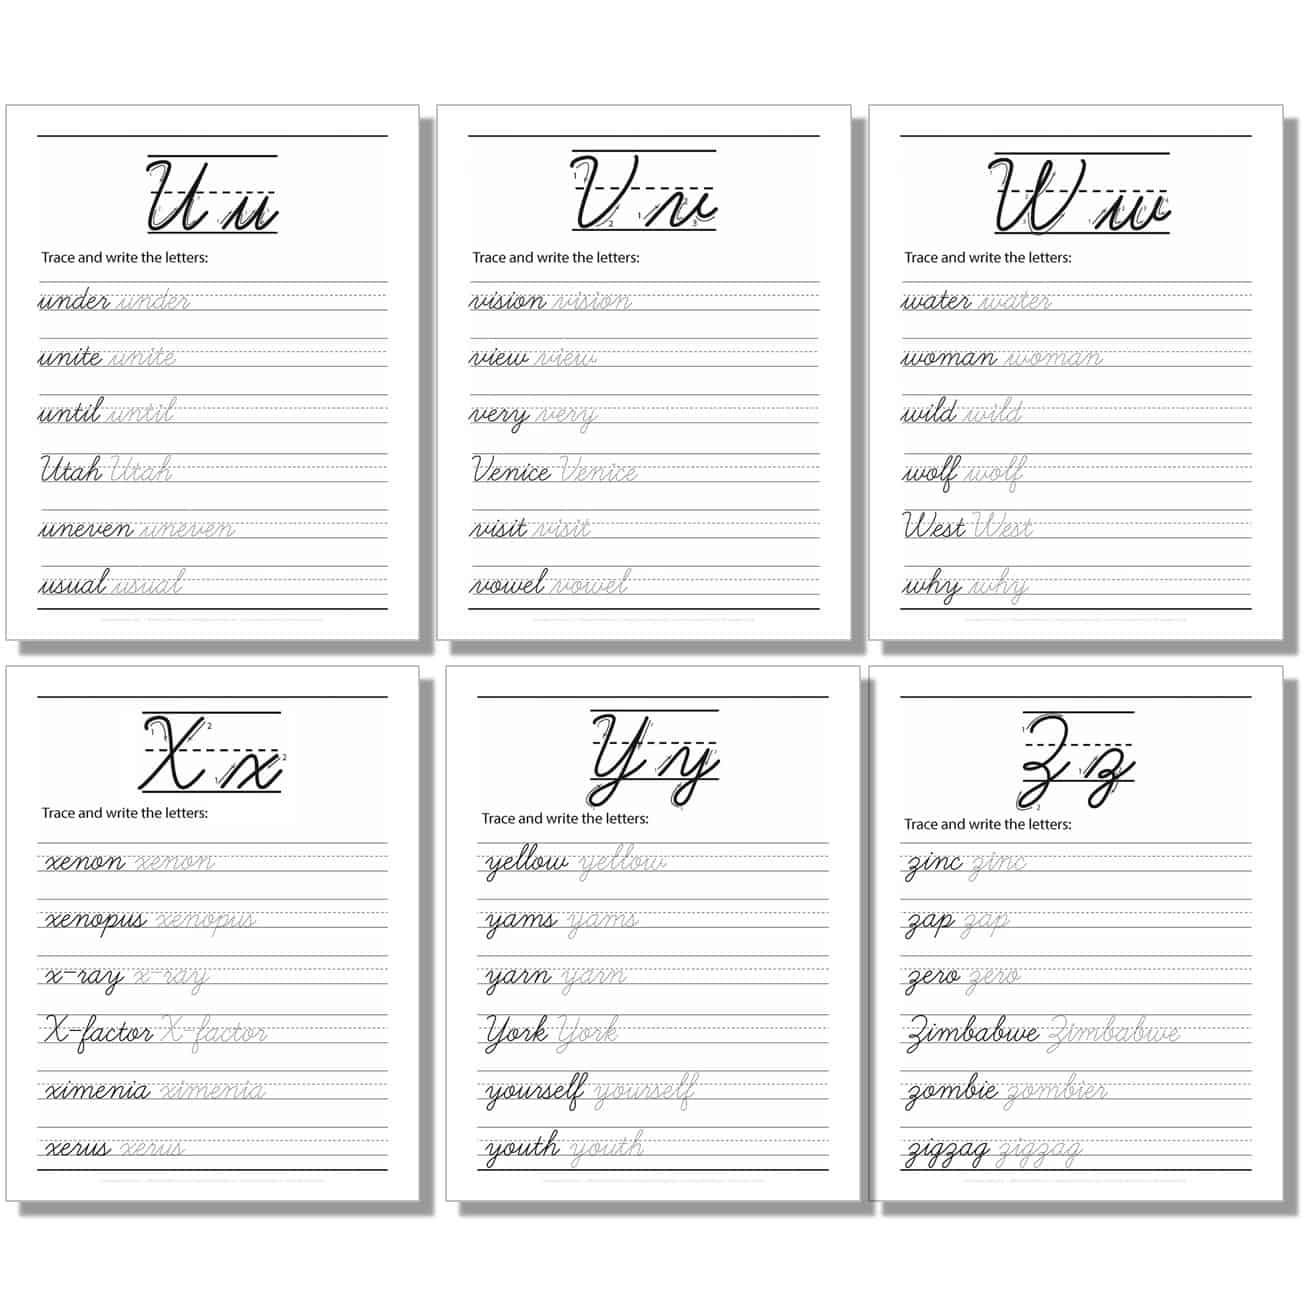 cursive worksheet with large uppercase, lowercase word for u, v, w, x, y, z.